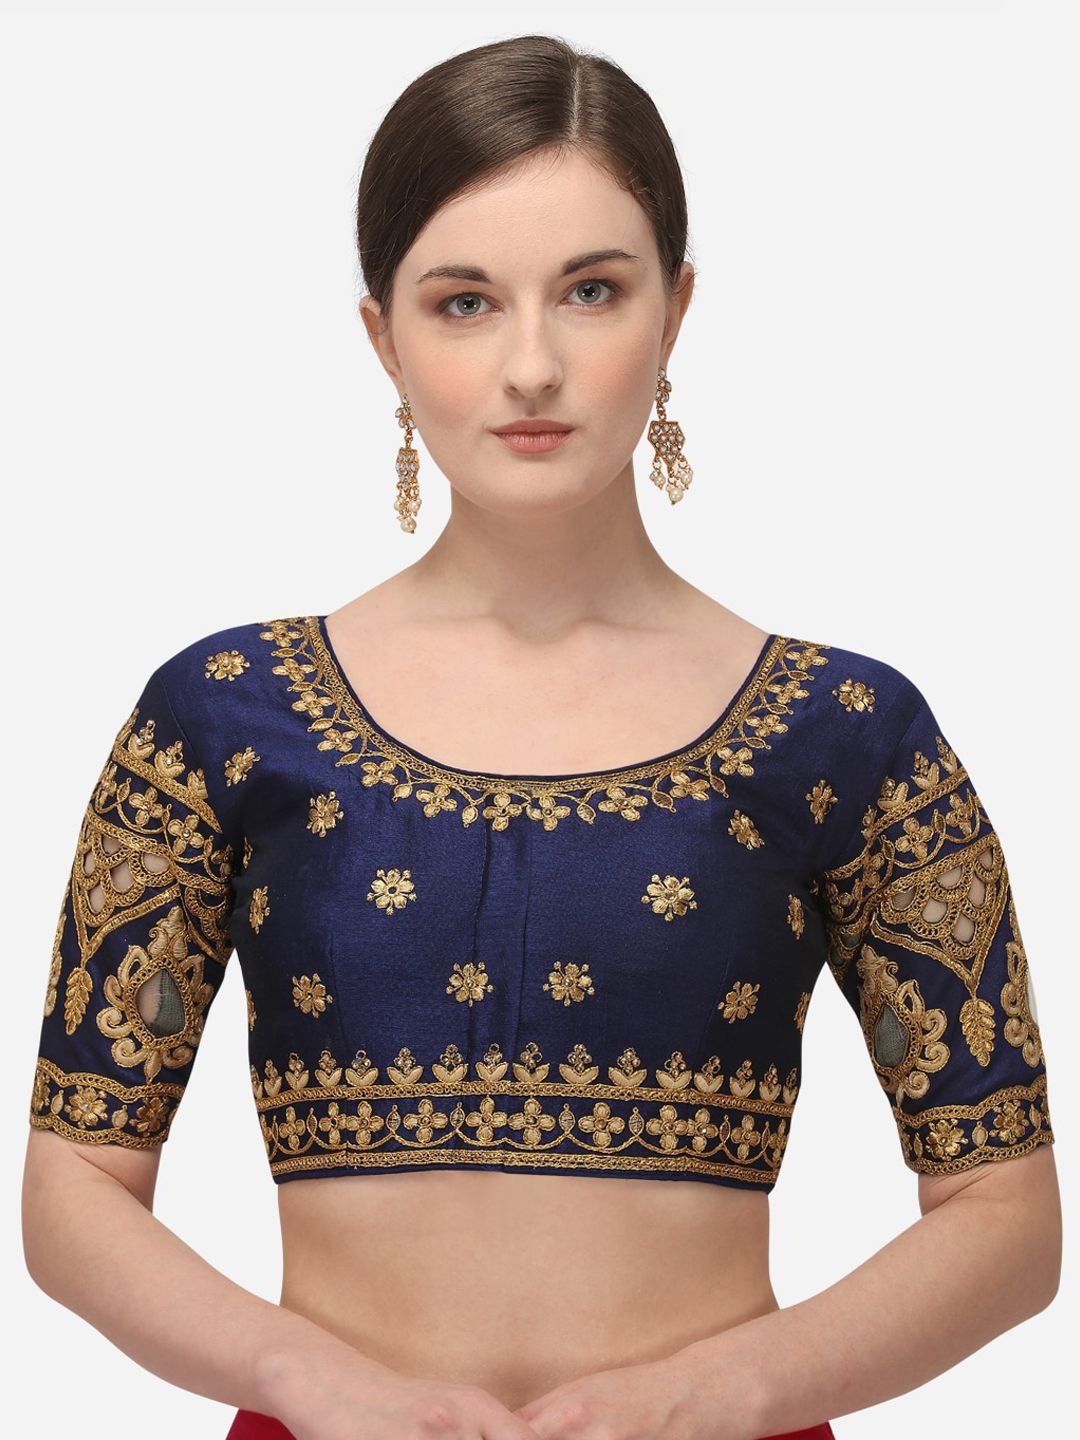 Amrutam Fab Women Navy Blue & Gold-Coloured Embroidered Raw Silk Saree Blouse Price in India